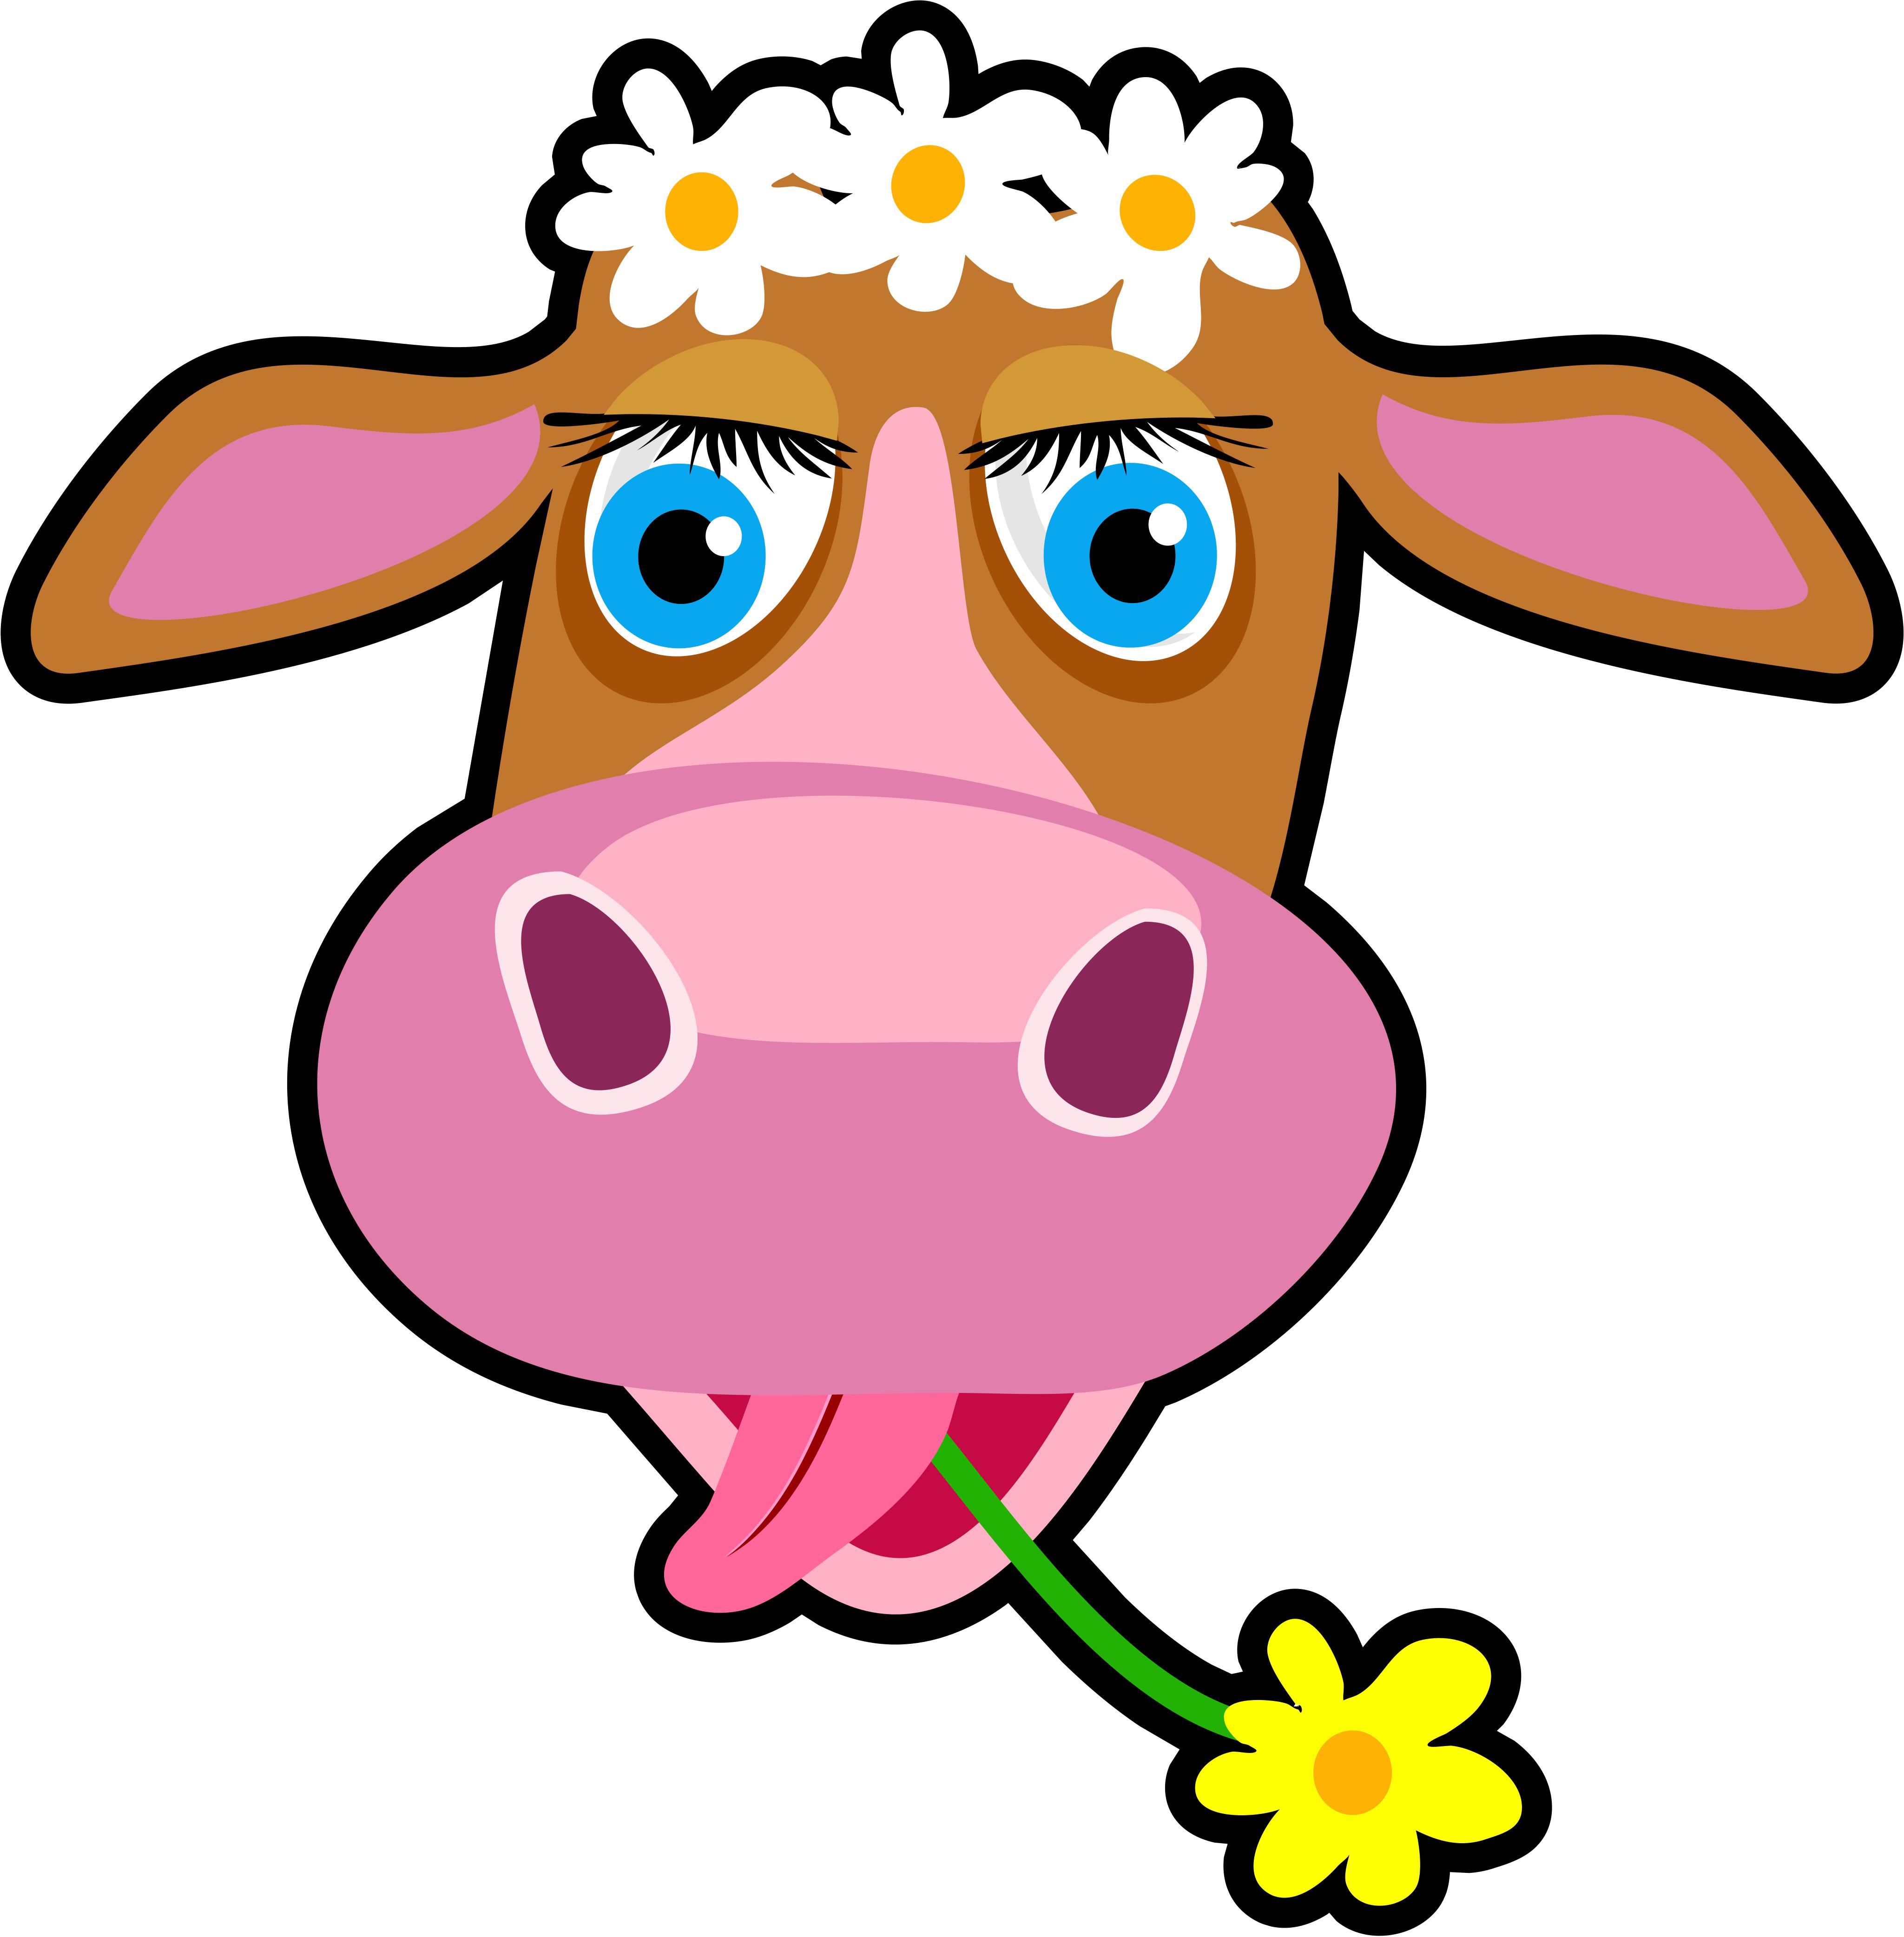 Daisy The Cow image - vector clip art online, royalty free ...